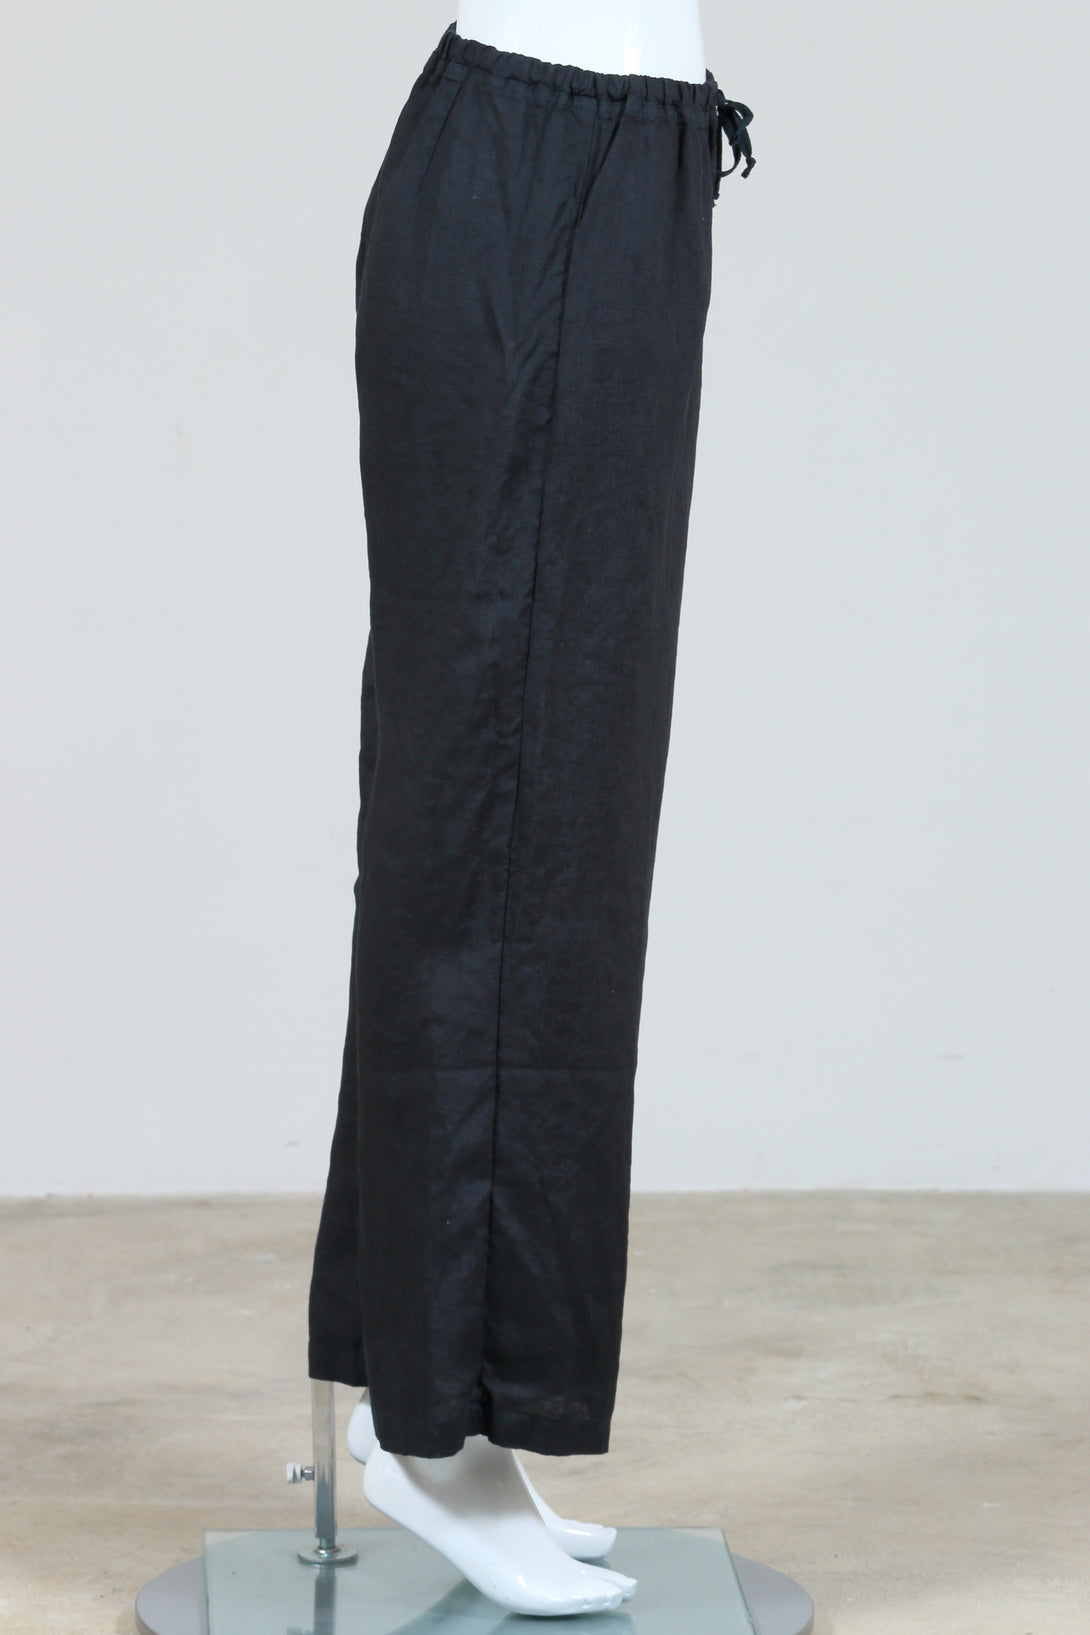 The CP Shades Jenn Pant is a loose fitting linen pant with a long, wide leg.